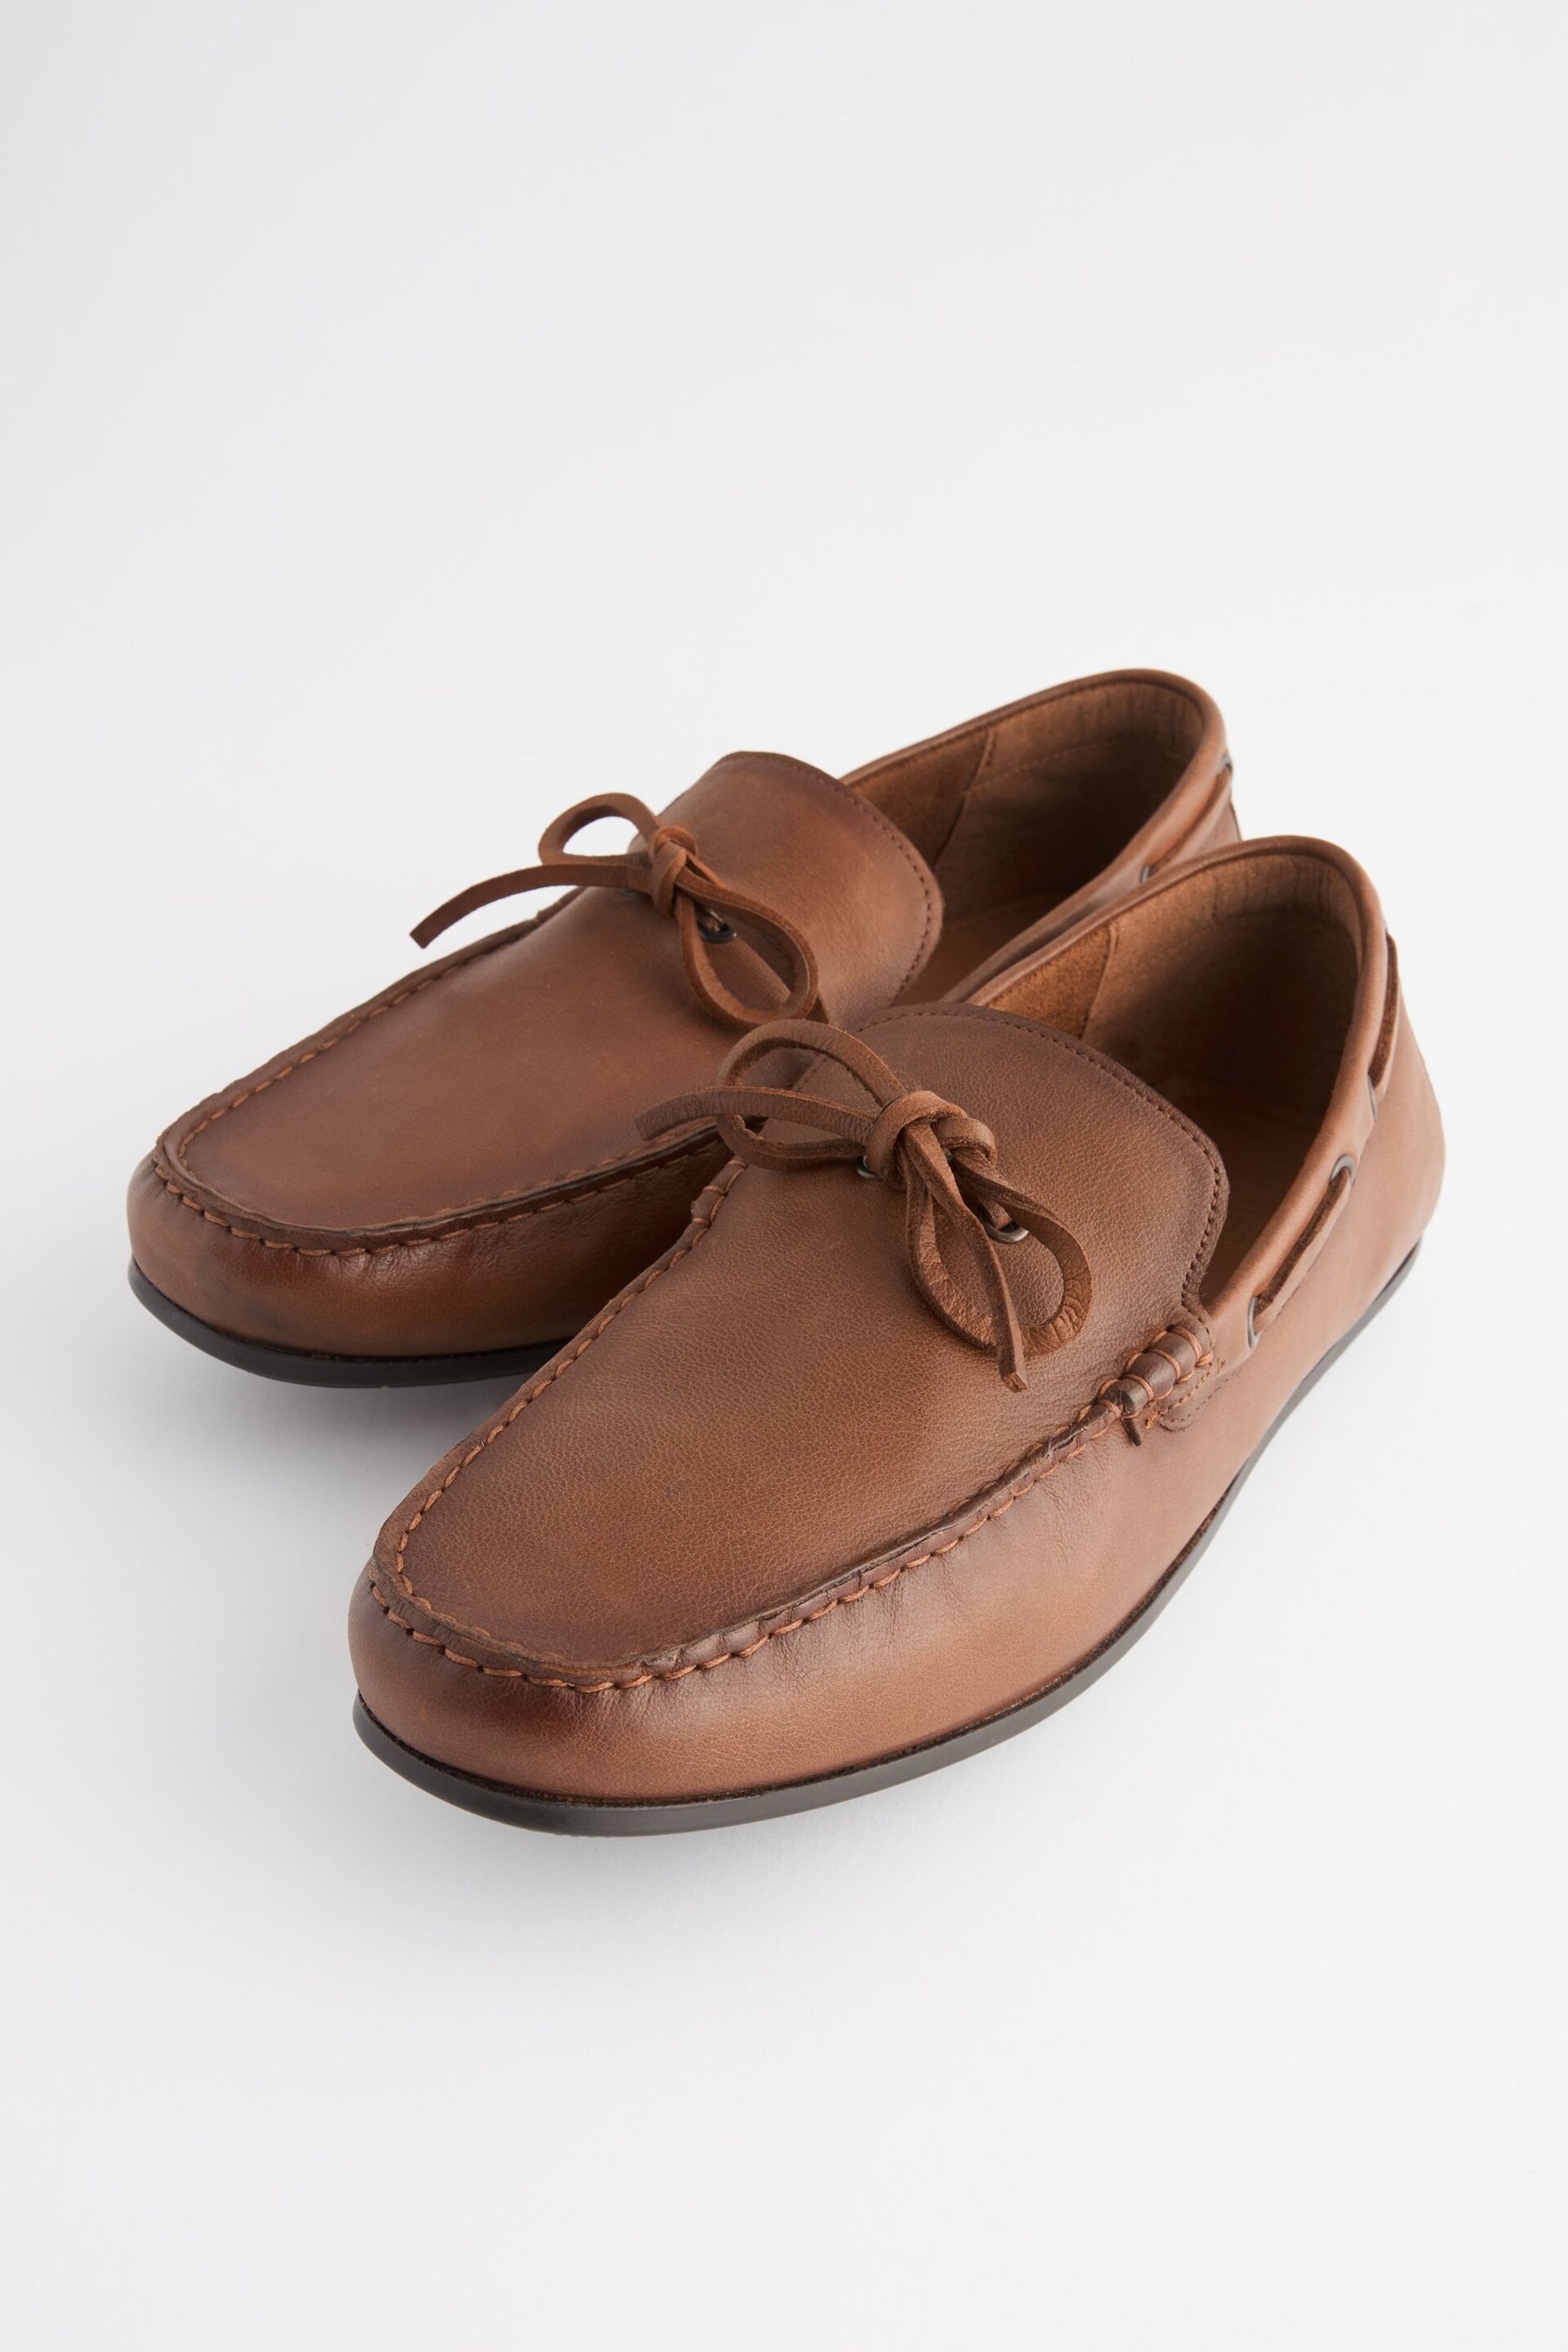 Tan Brown Leather Driving Shoes - Image 2 of 5